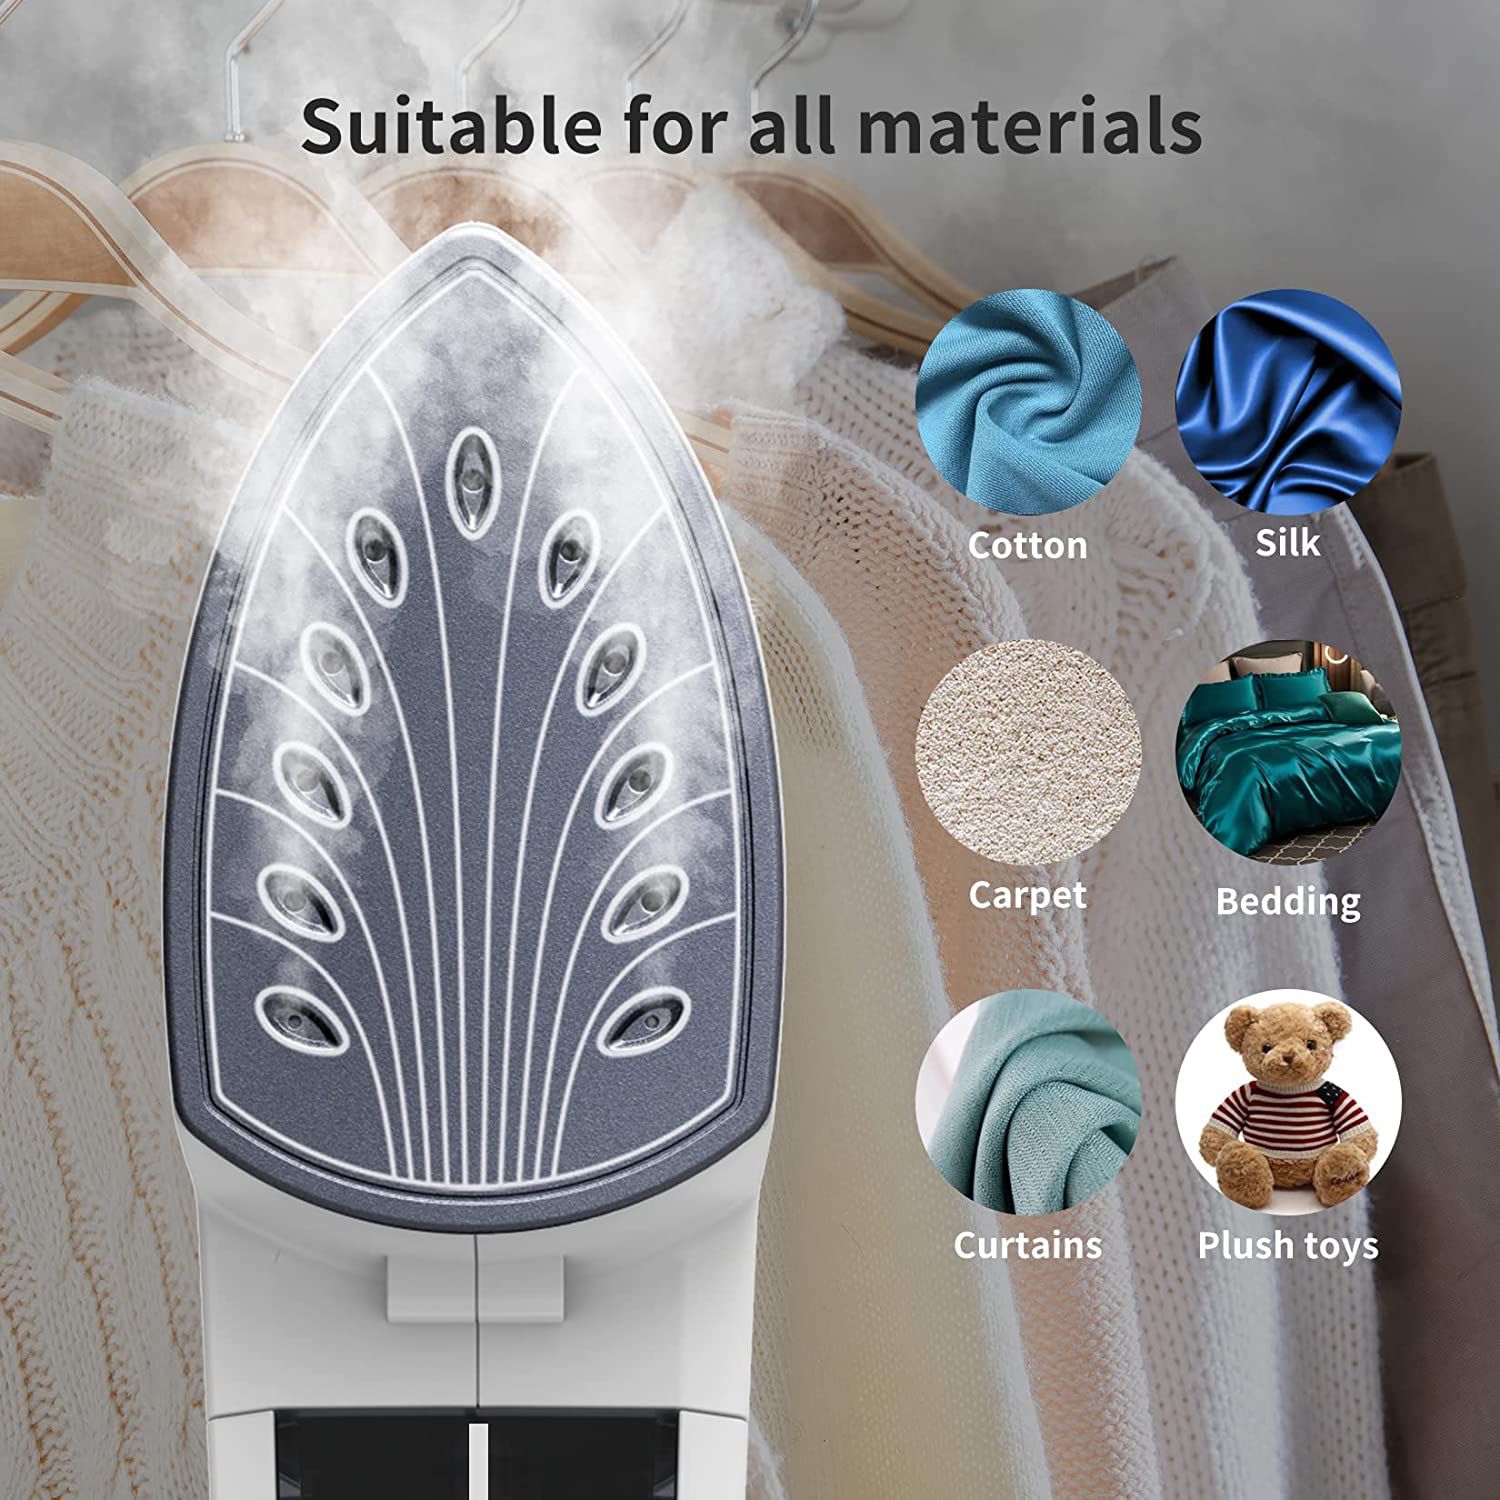 Professional Handheld Steam Iron, Garment Steamer Iron for Clothes, Portable Travel Steamer Iron, 1300W 40s Rapid Even Heat Ceramic Coated Soleplate, 